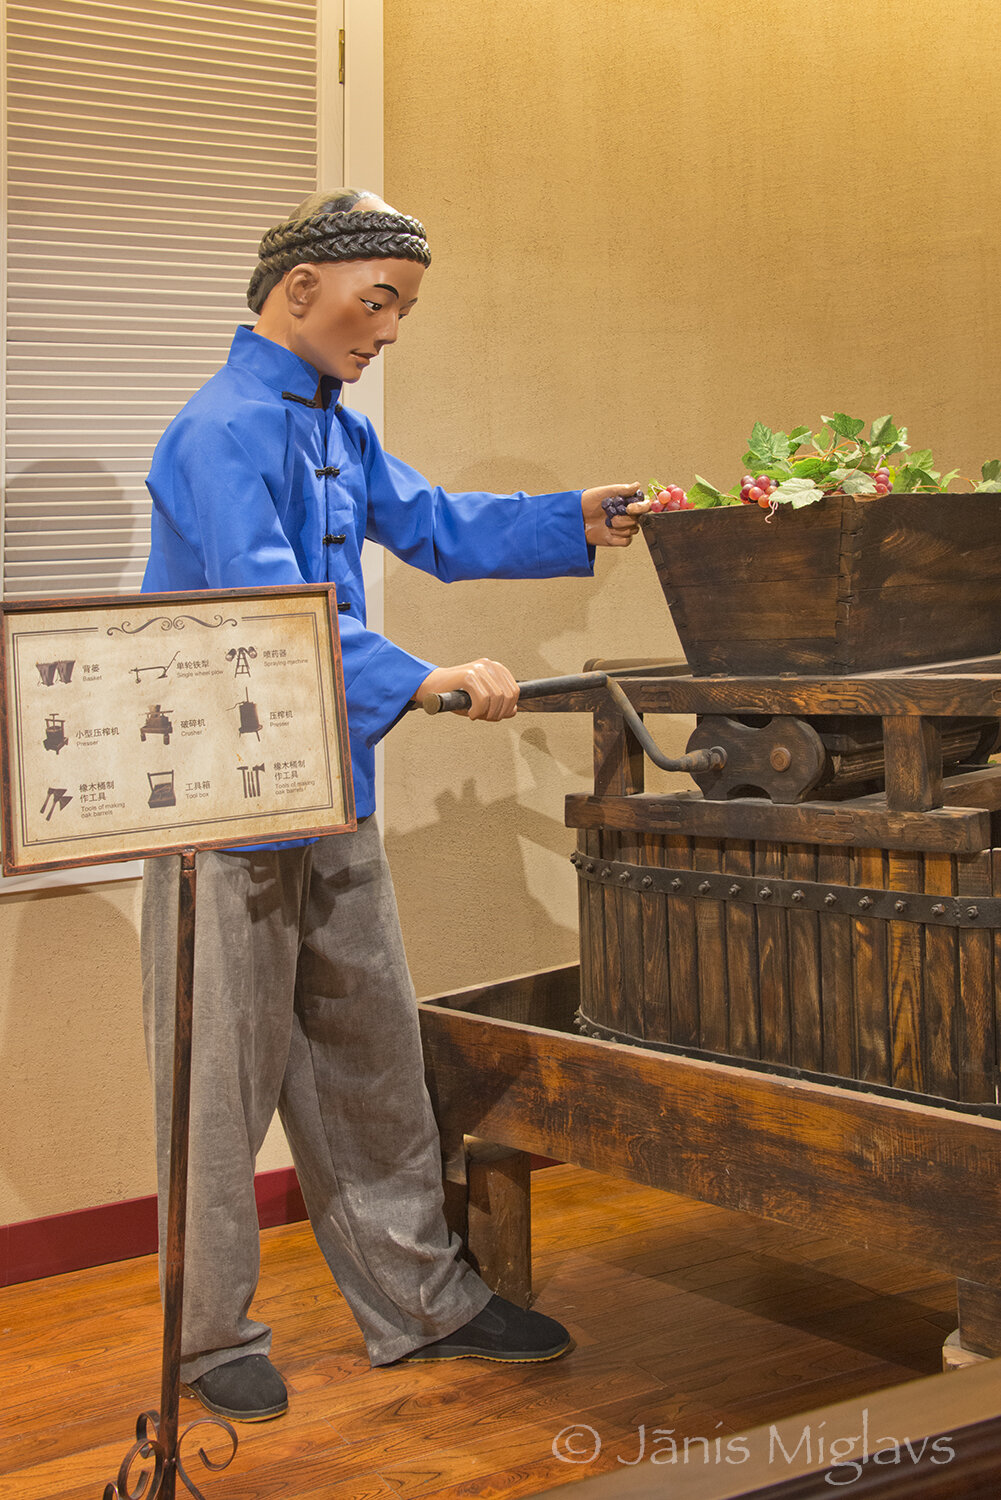 Chinese man working a small wine press in a winery display.